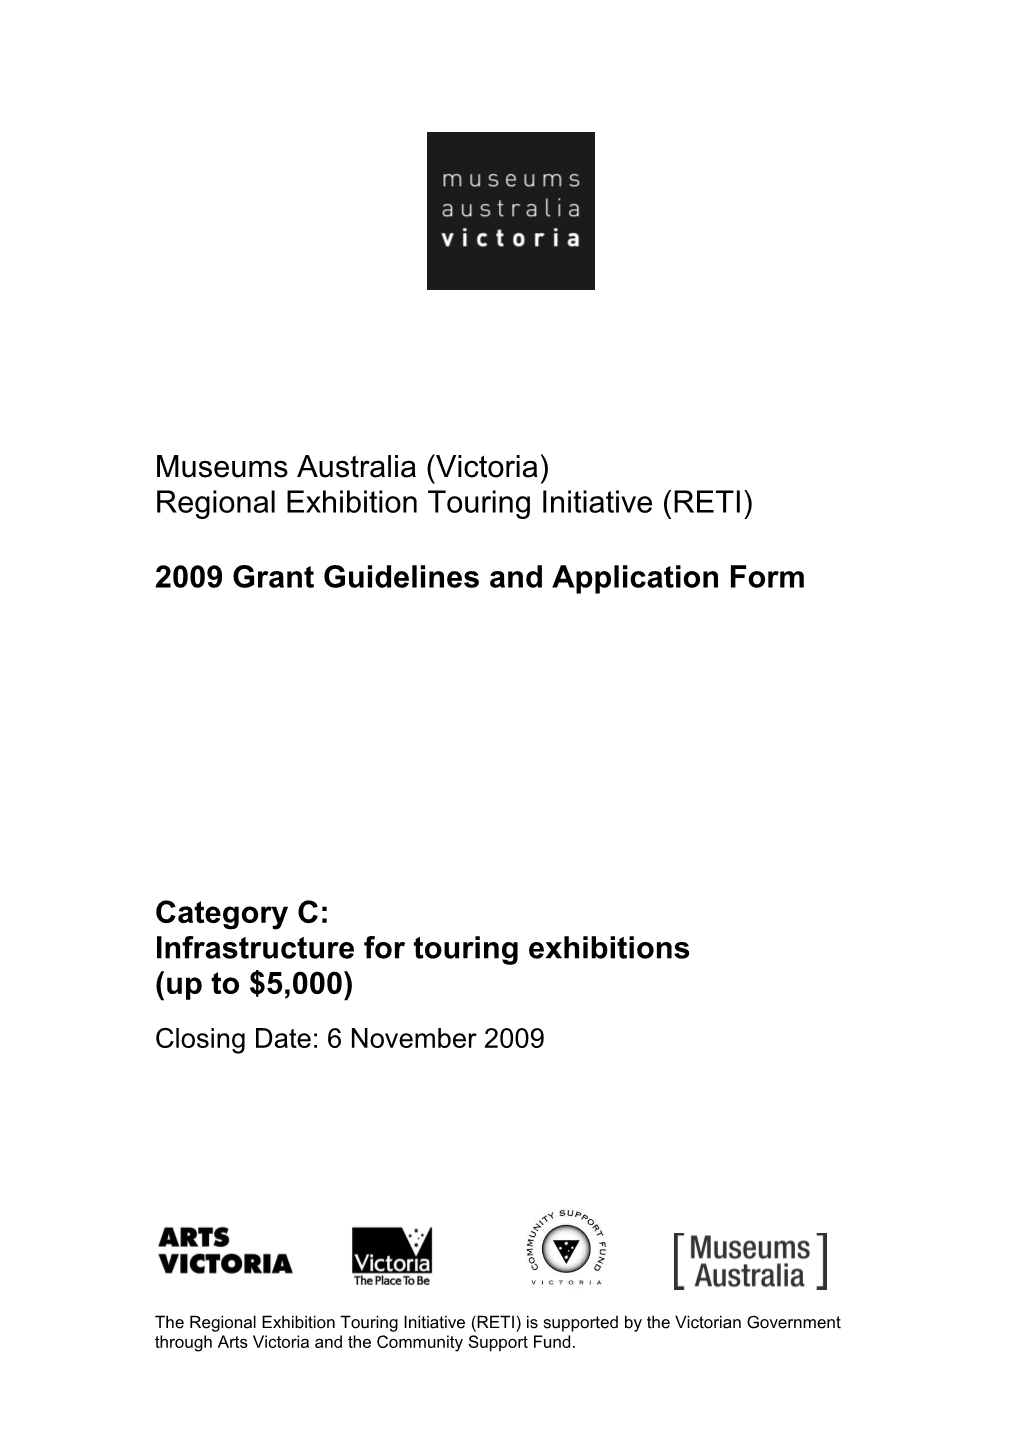 2009 Reti Grant Application Form: Category C - Infrastructure